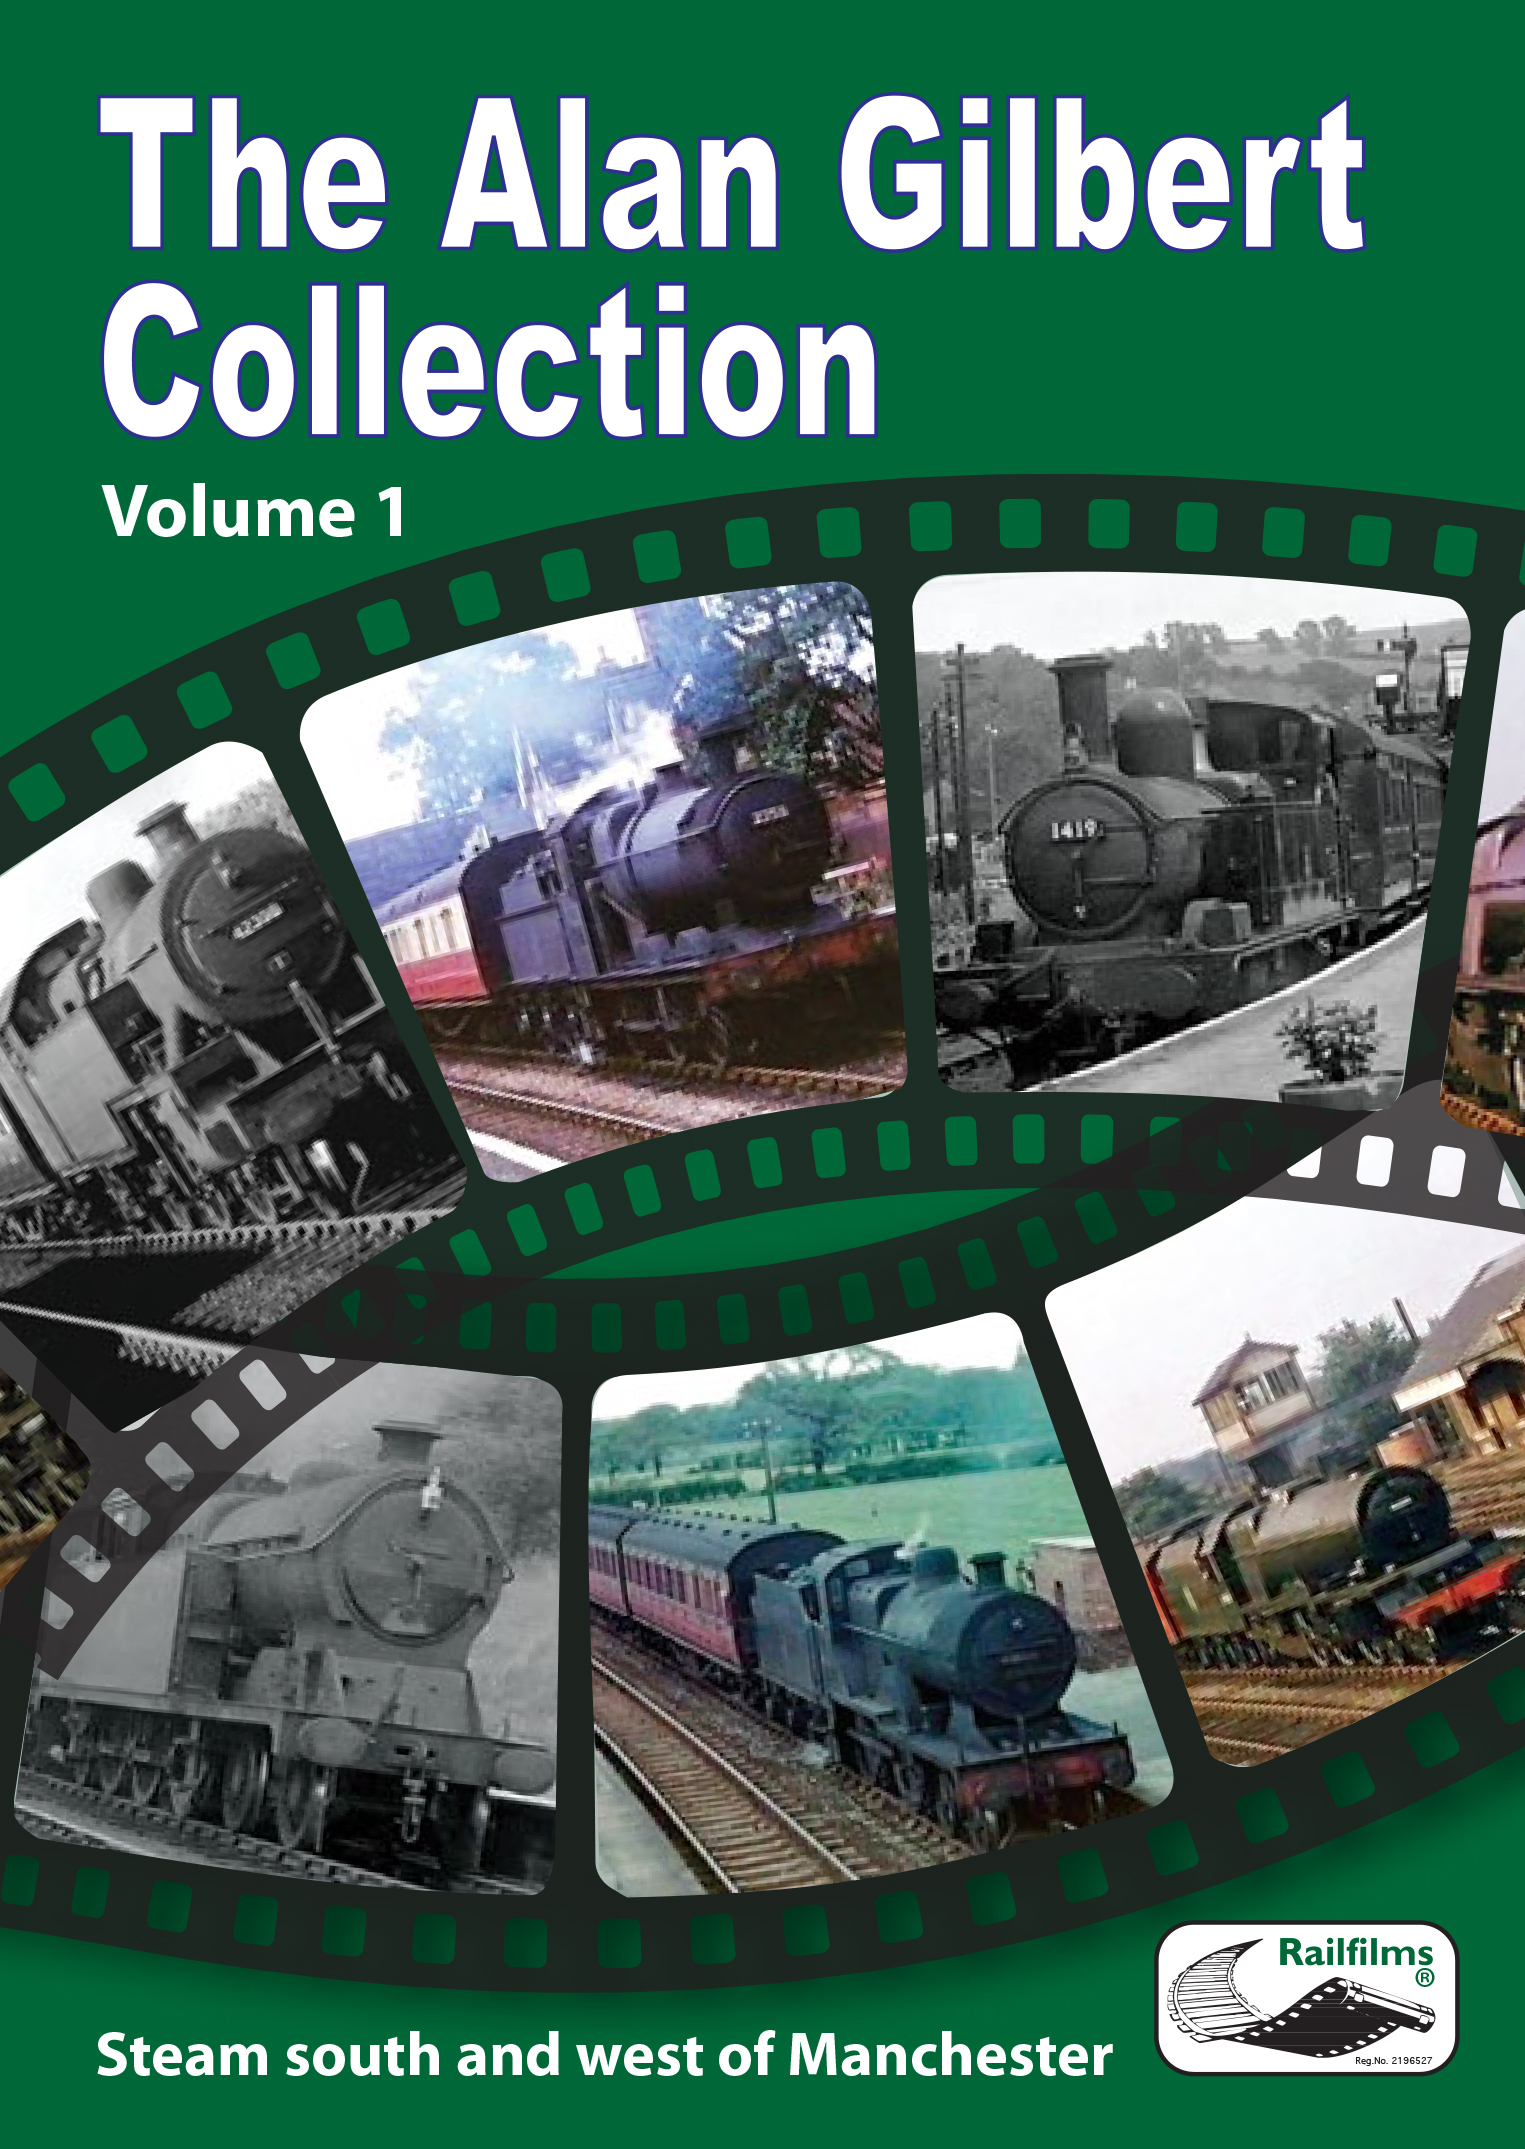 The Alan Gilbert Collection Vol. 1: Steam South and West of Manchester